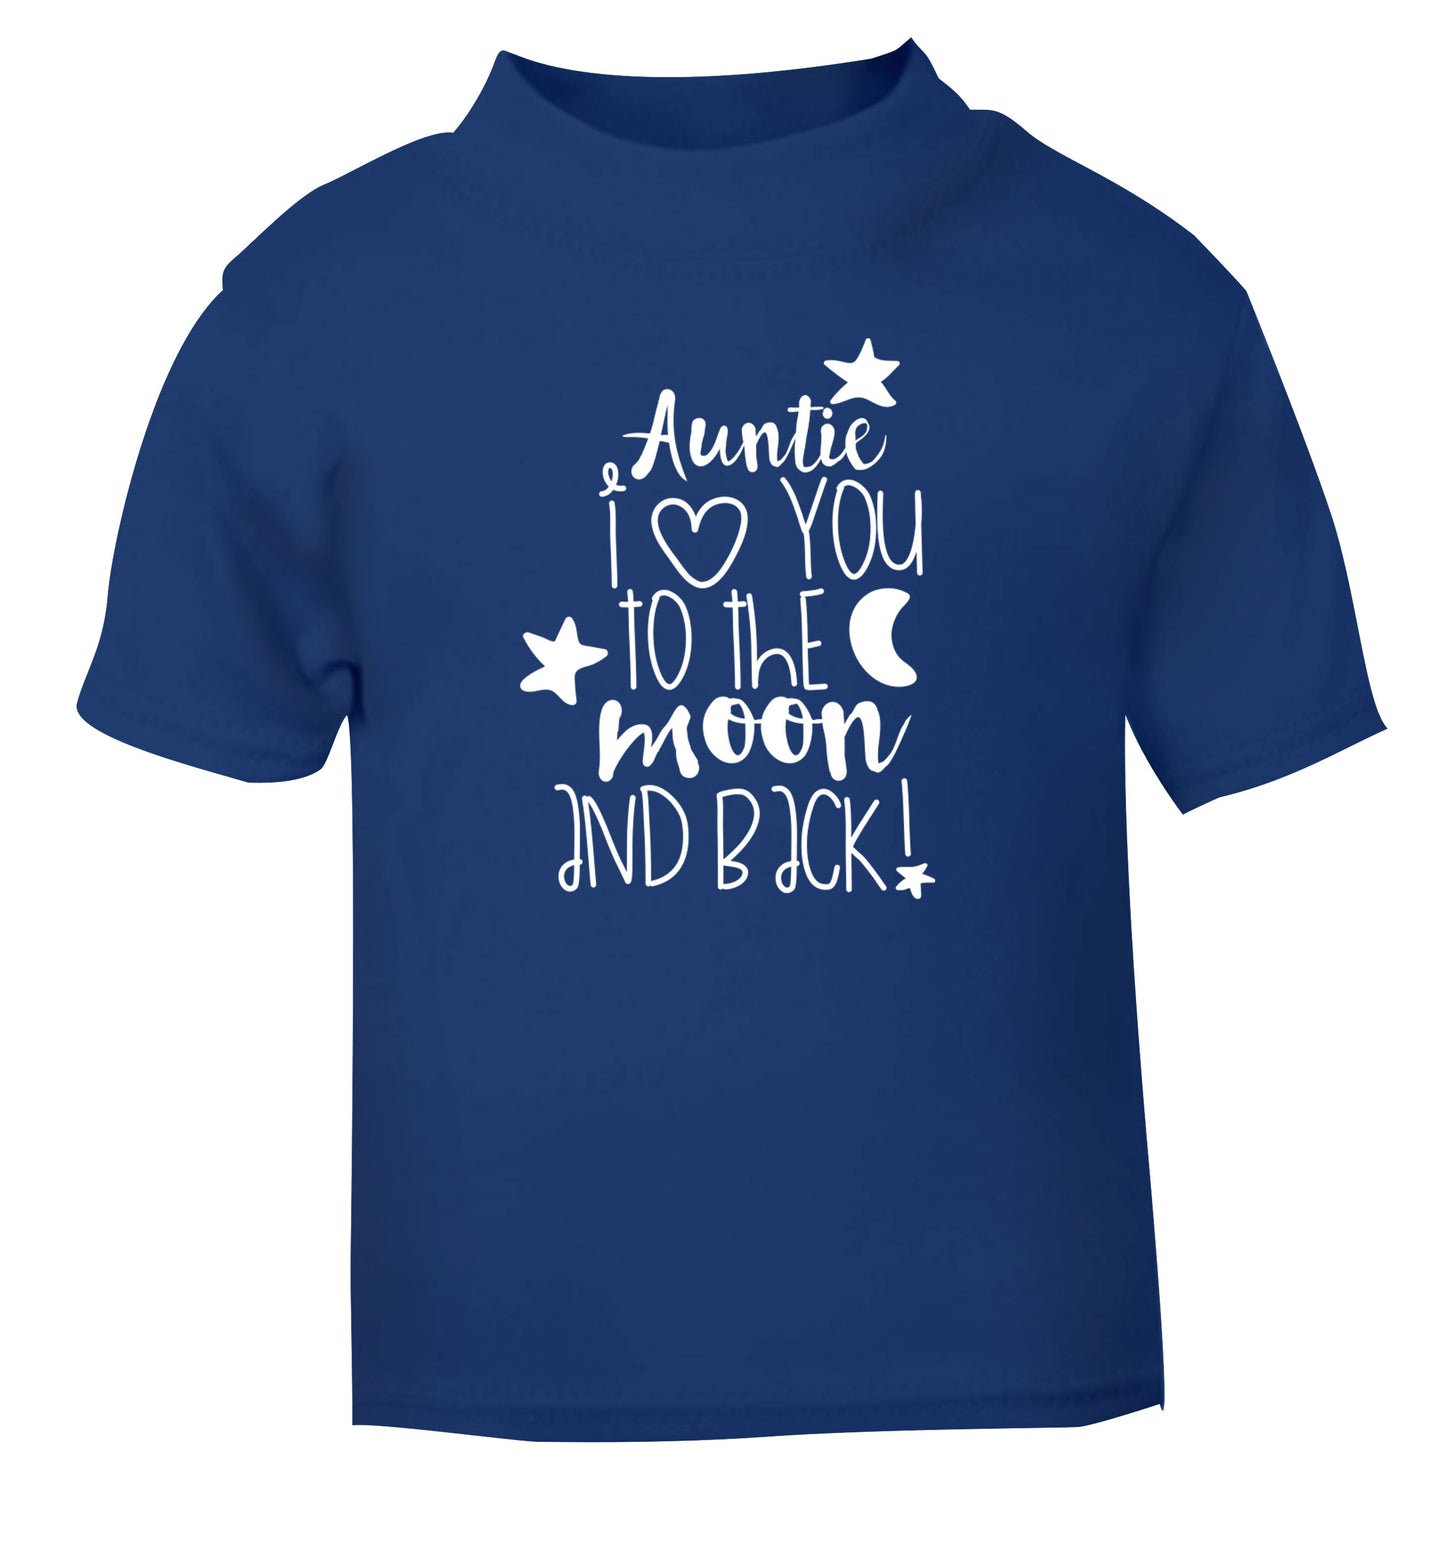 Auntie I love you to the moon and back blue Baby Toddler Tshirt 2 Years